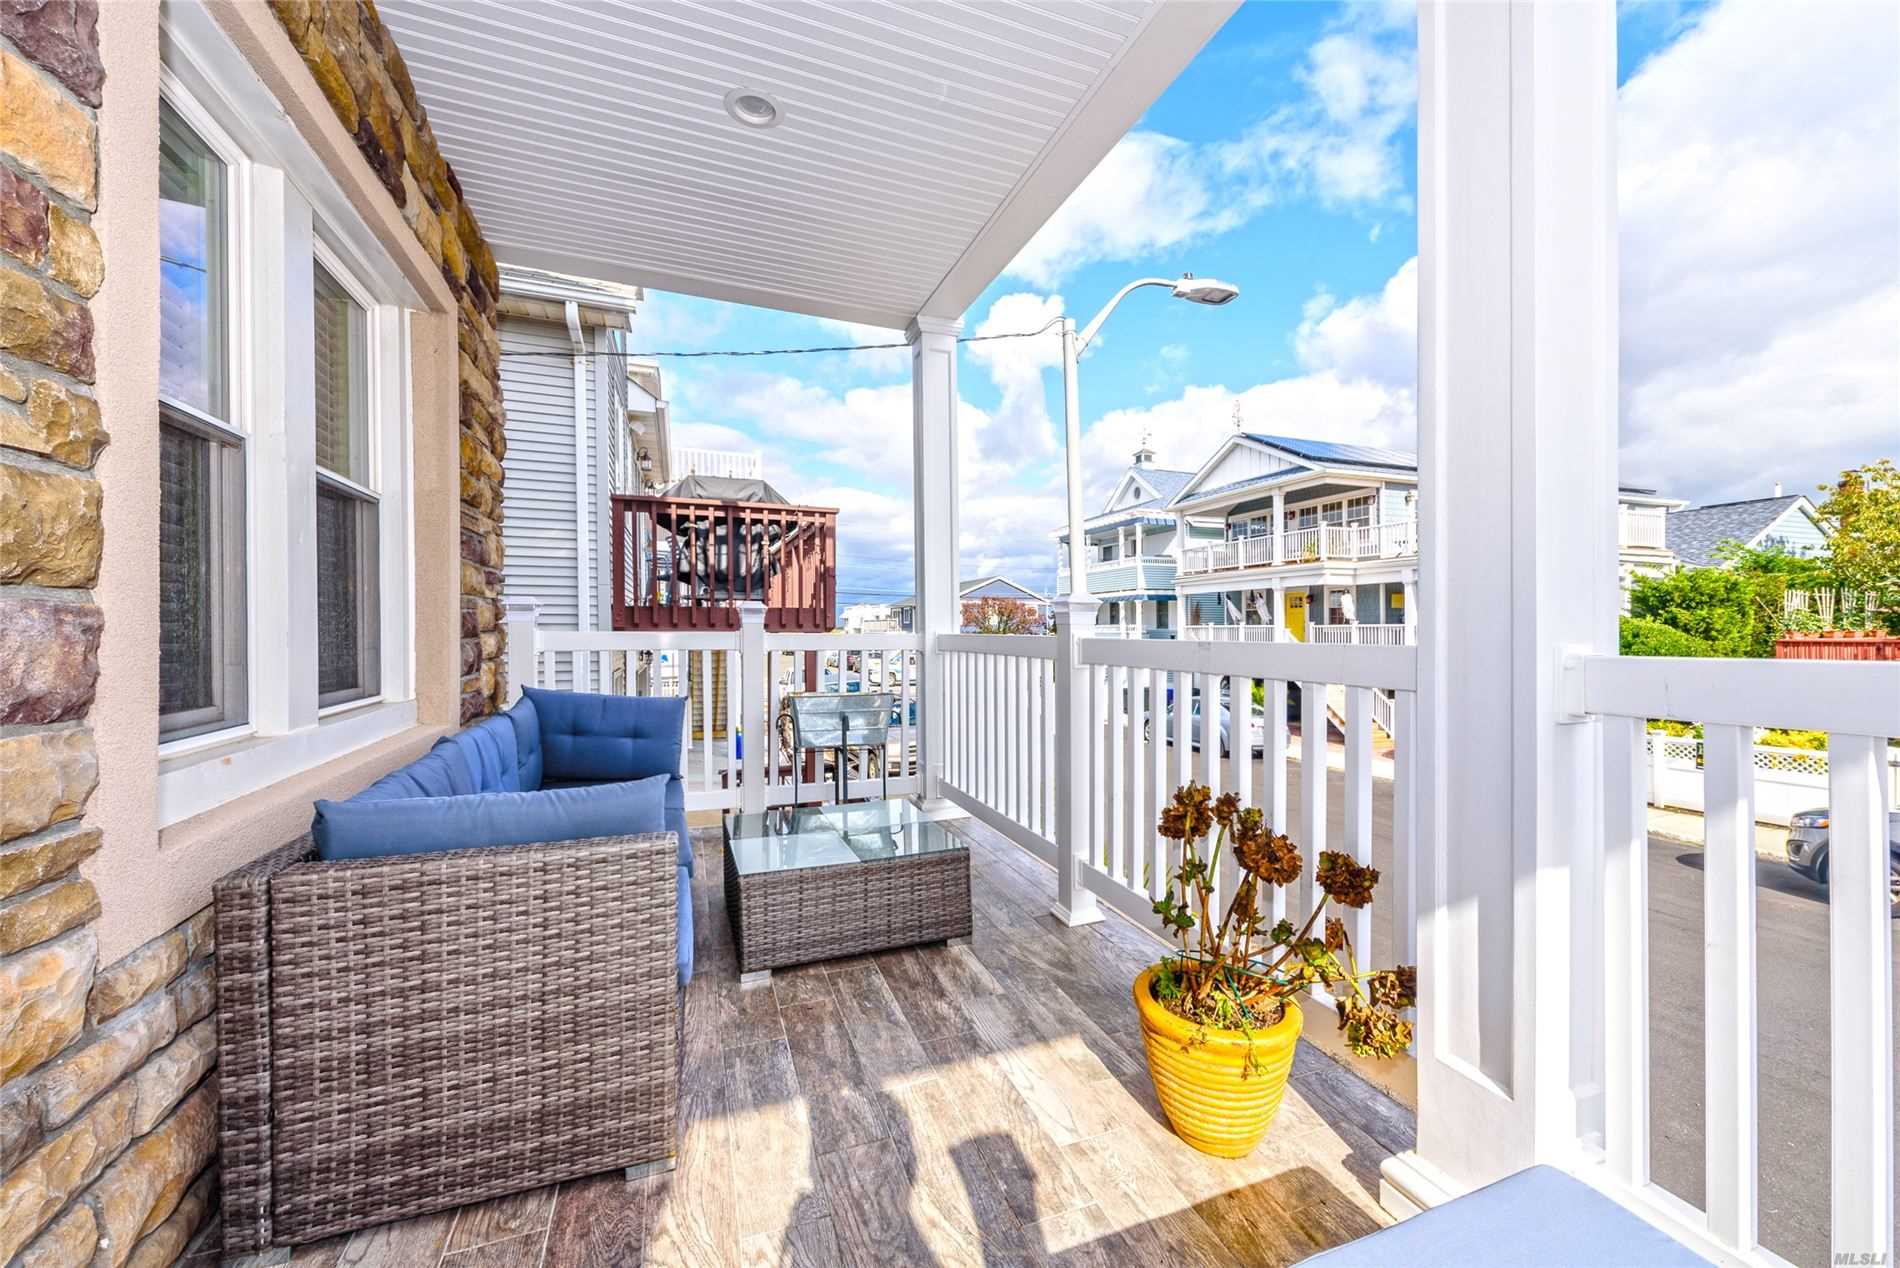 Impeccably Renovated FEMA Compliant Wide Block Stunner! Open Layout W/Gorgeous Hw Floors & Crown Molding Throughout: Living Room W/Cozy Gas Fireplace, Dining Area, Kitchen W/Ss Appliances & Granite Counters & Island, 2 Bedrooms. 3rd Floor Master Ensuite W/Huge Walk In Closet & Full Bath & 1 Car Garage. Enjoy Bay Views From Upper Deck & Front Porch! New Garage Door, Anderson Windows, Chimney, A/C System. The List Goes ON! Flood Insurance: $504.00